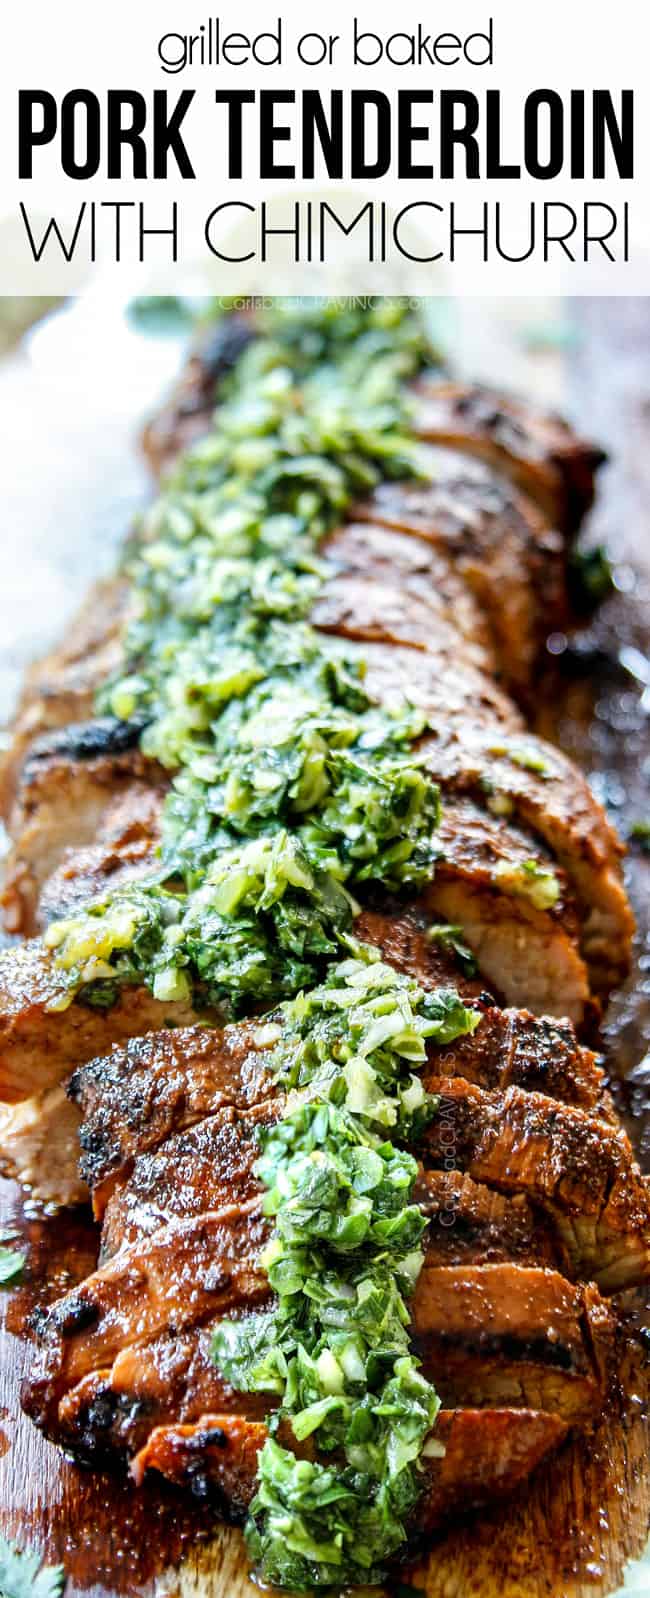 Grilled Pork Tenderloin With Chimichurri Step By Step Photos Tips Tricks,How To Make Bbq Ribs